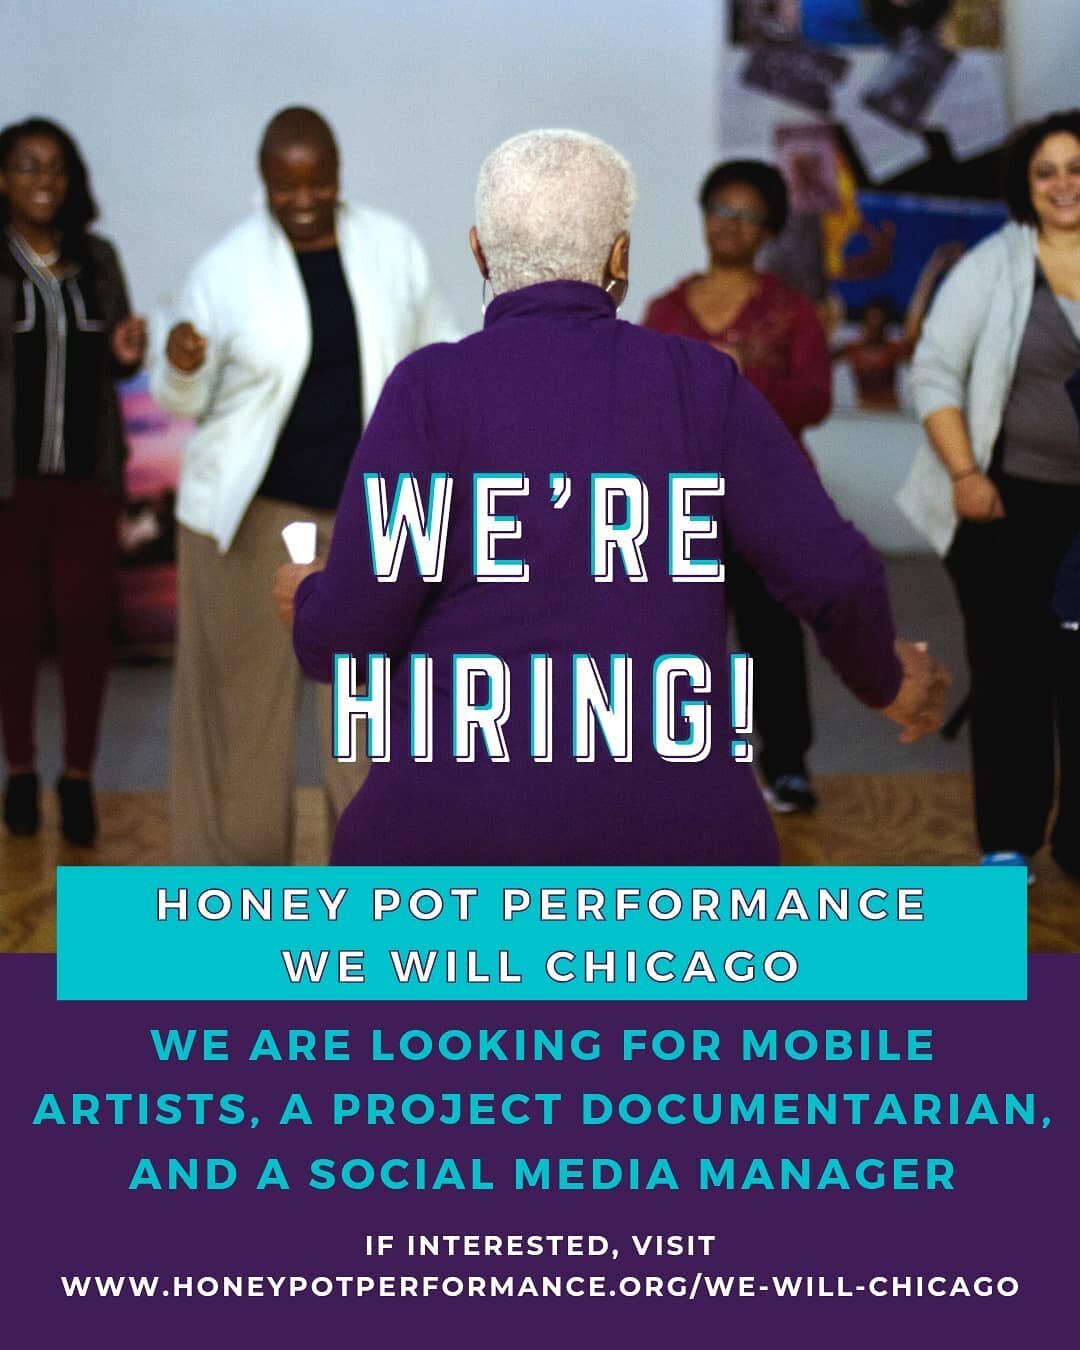 Honey Pot Performance is still hiring! Come join the team.

We are working on a new project with the Department of Planning and DCASE as part of the We Will Chicago initiative. As part of this work, HPP is hiring a team to collaborate with us on our 